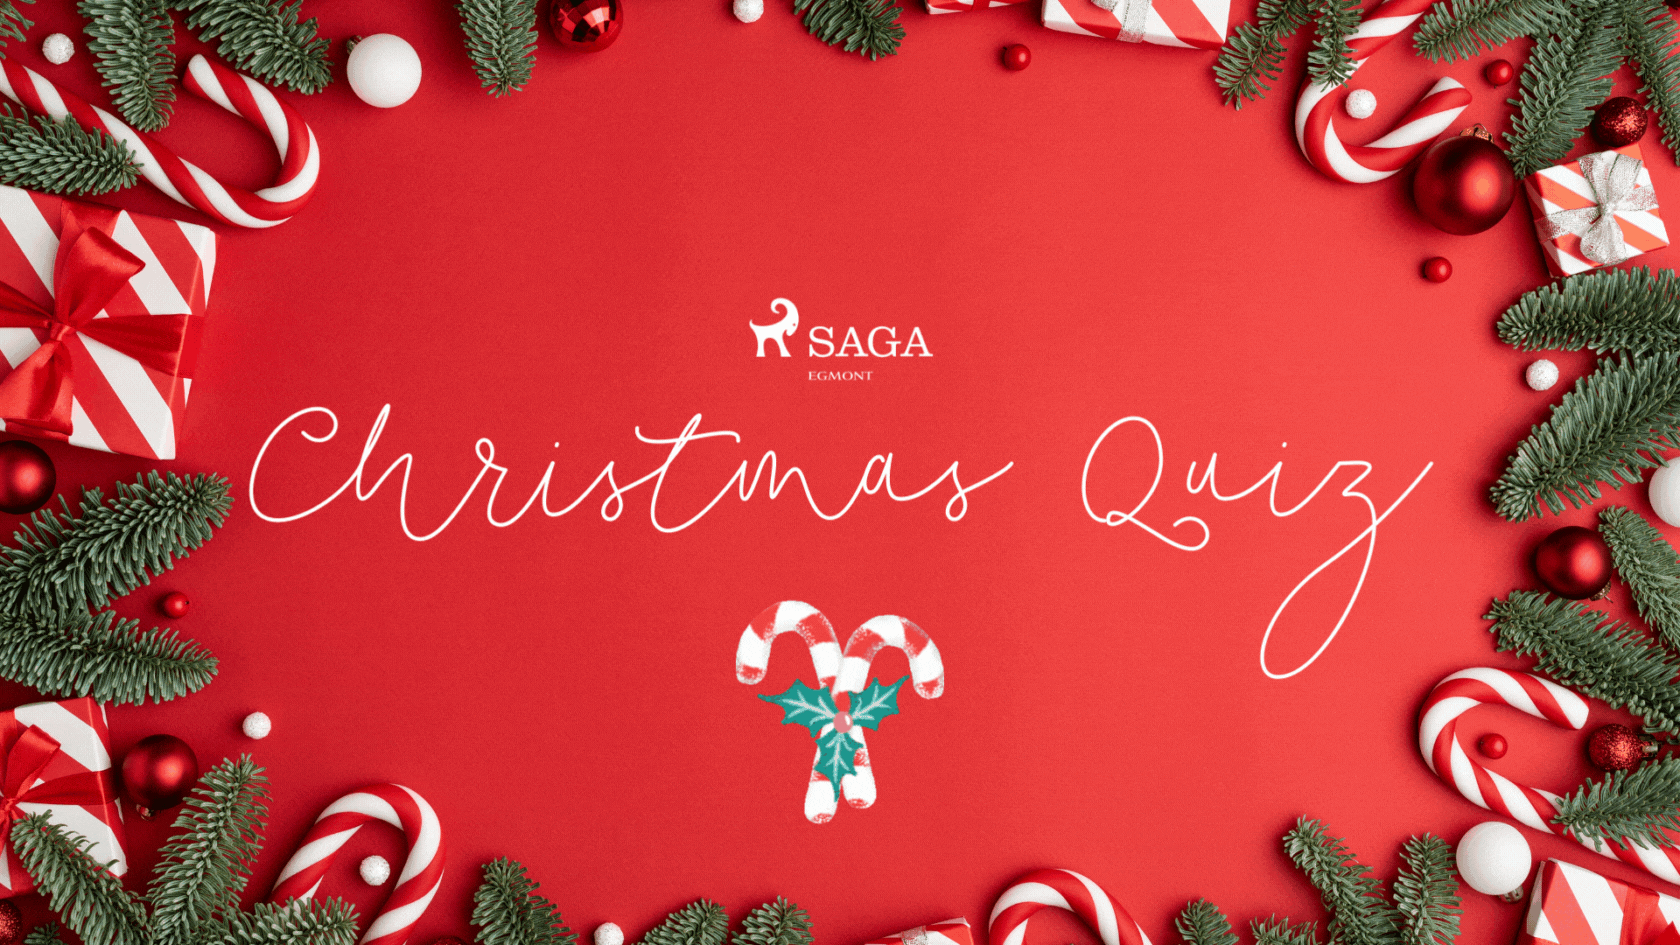 Wondering what to Gift this Christmas – Take the Quiz!